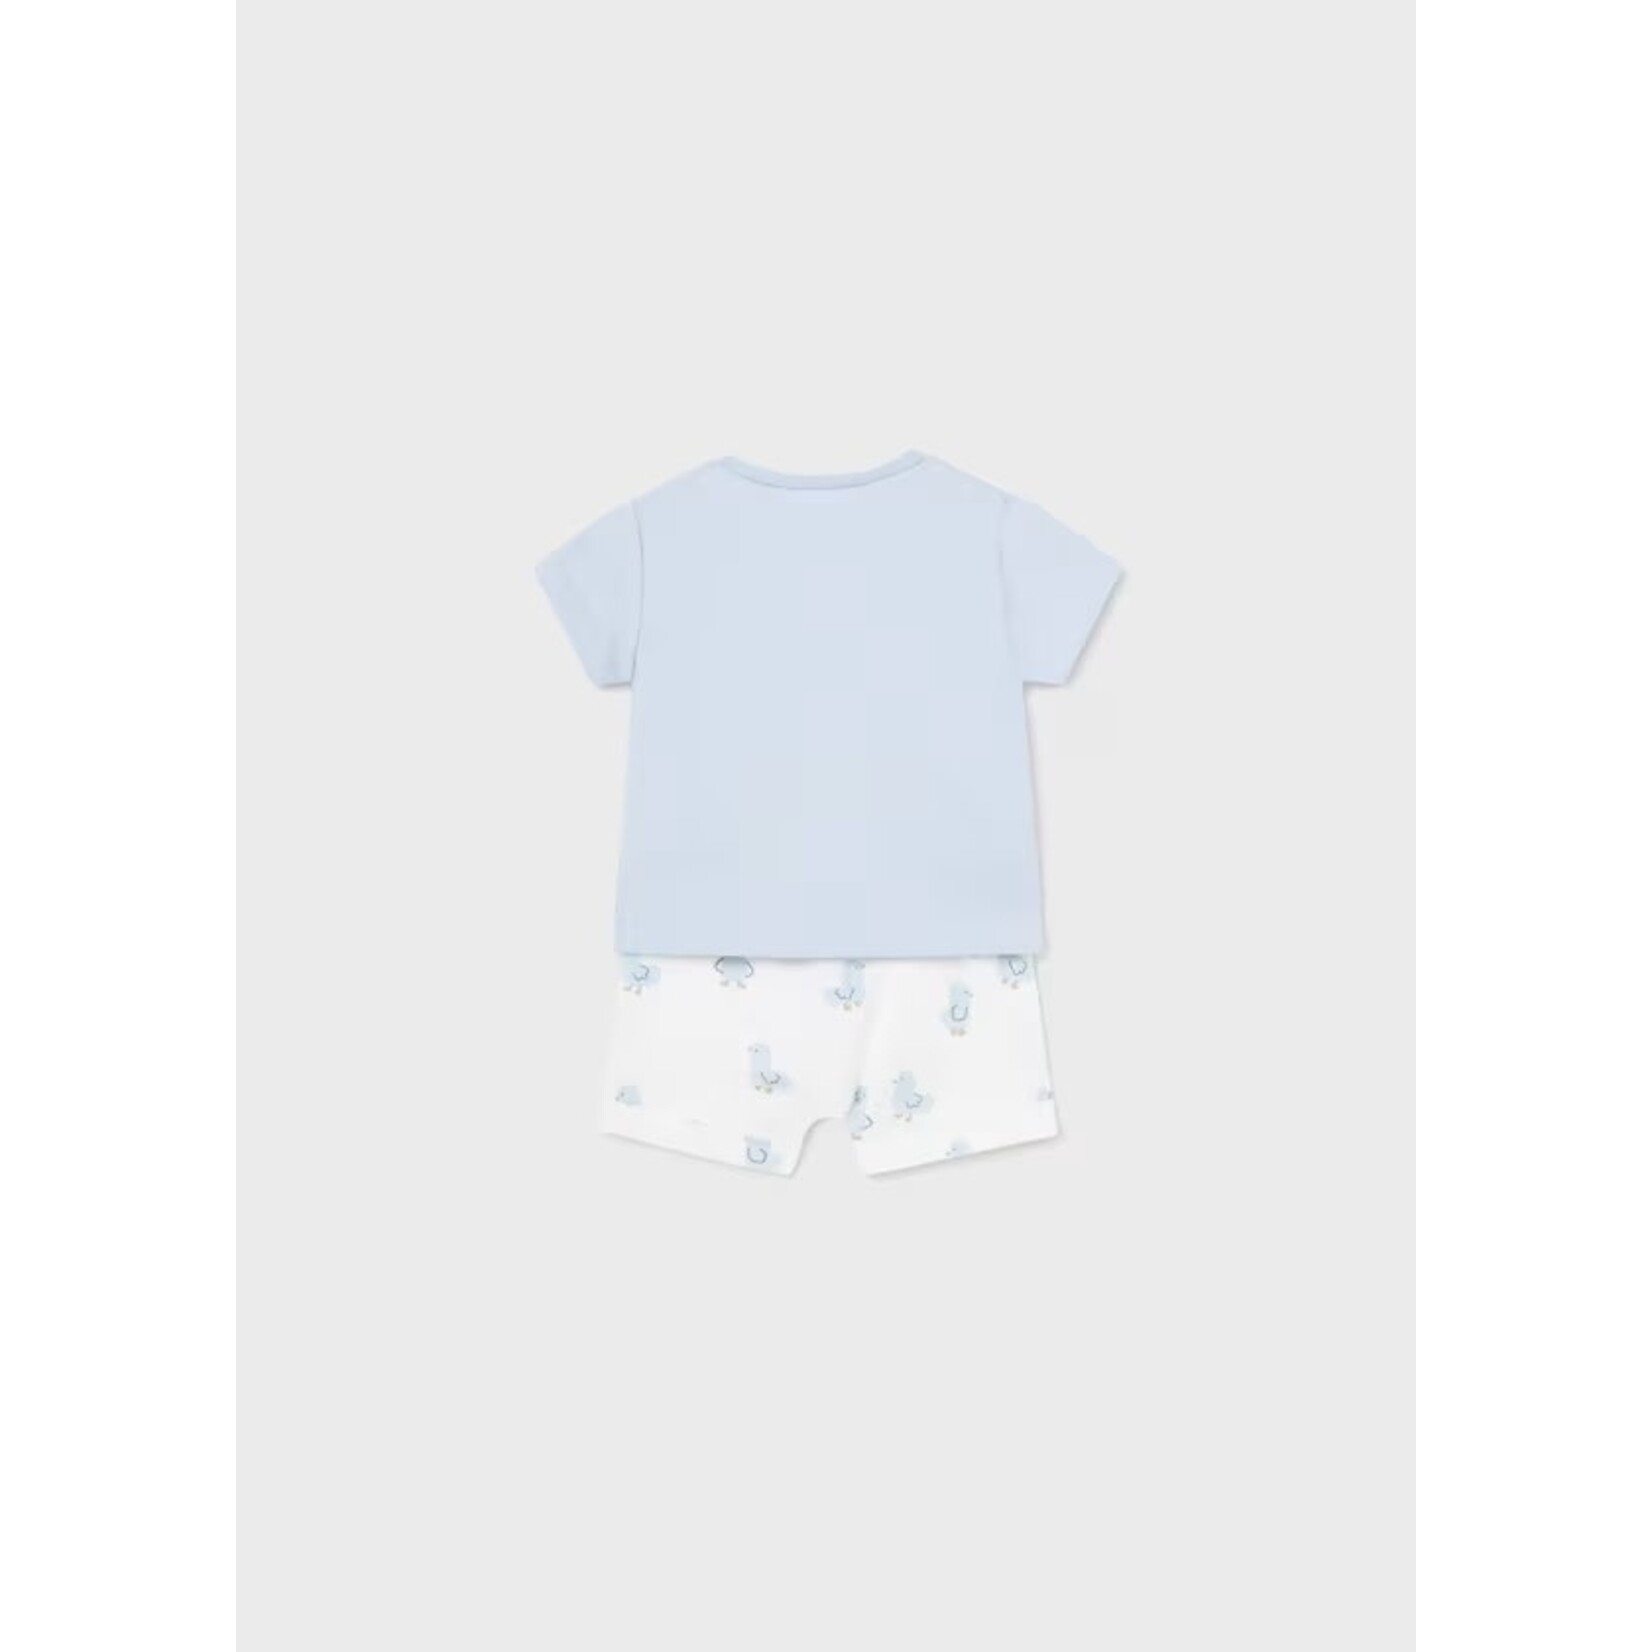 Mayoral MAYORAL - Two-piece Set - Light Blue T-Shirt with Duckling Print and White Shorts with All-Over Duckling Print